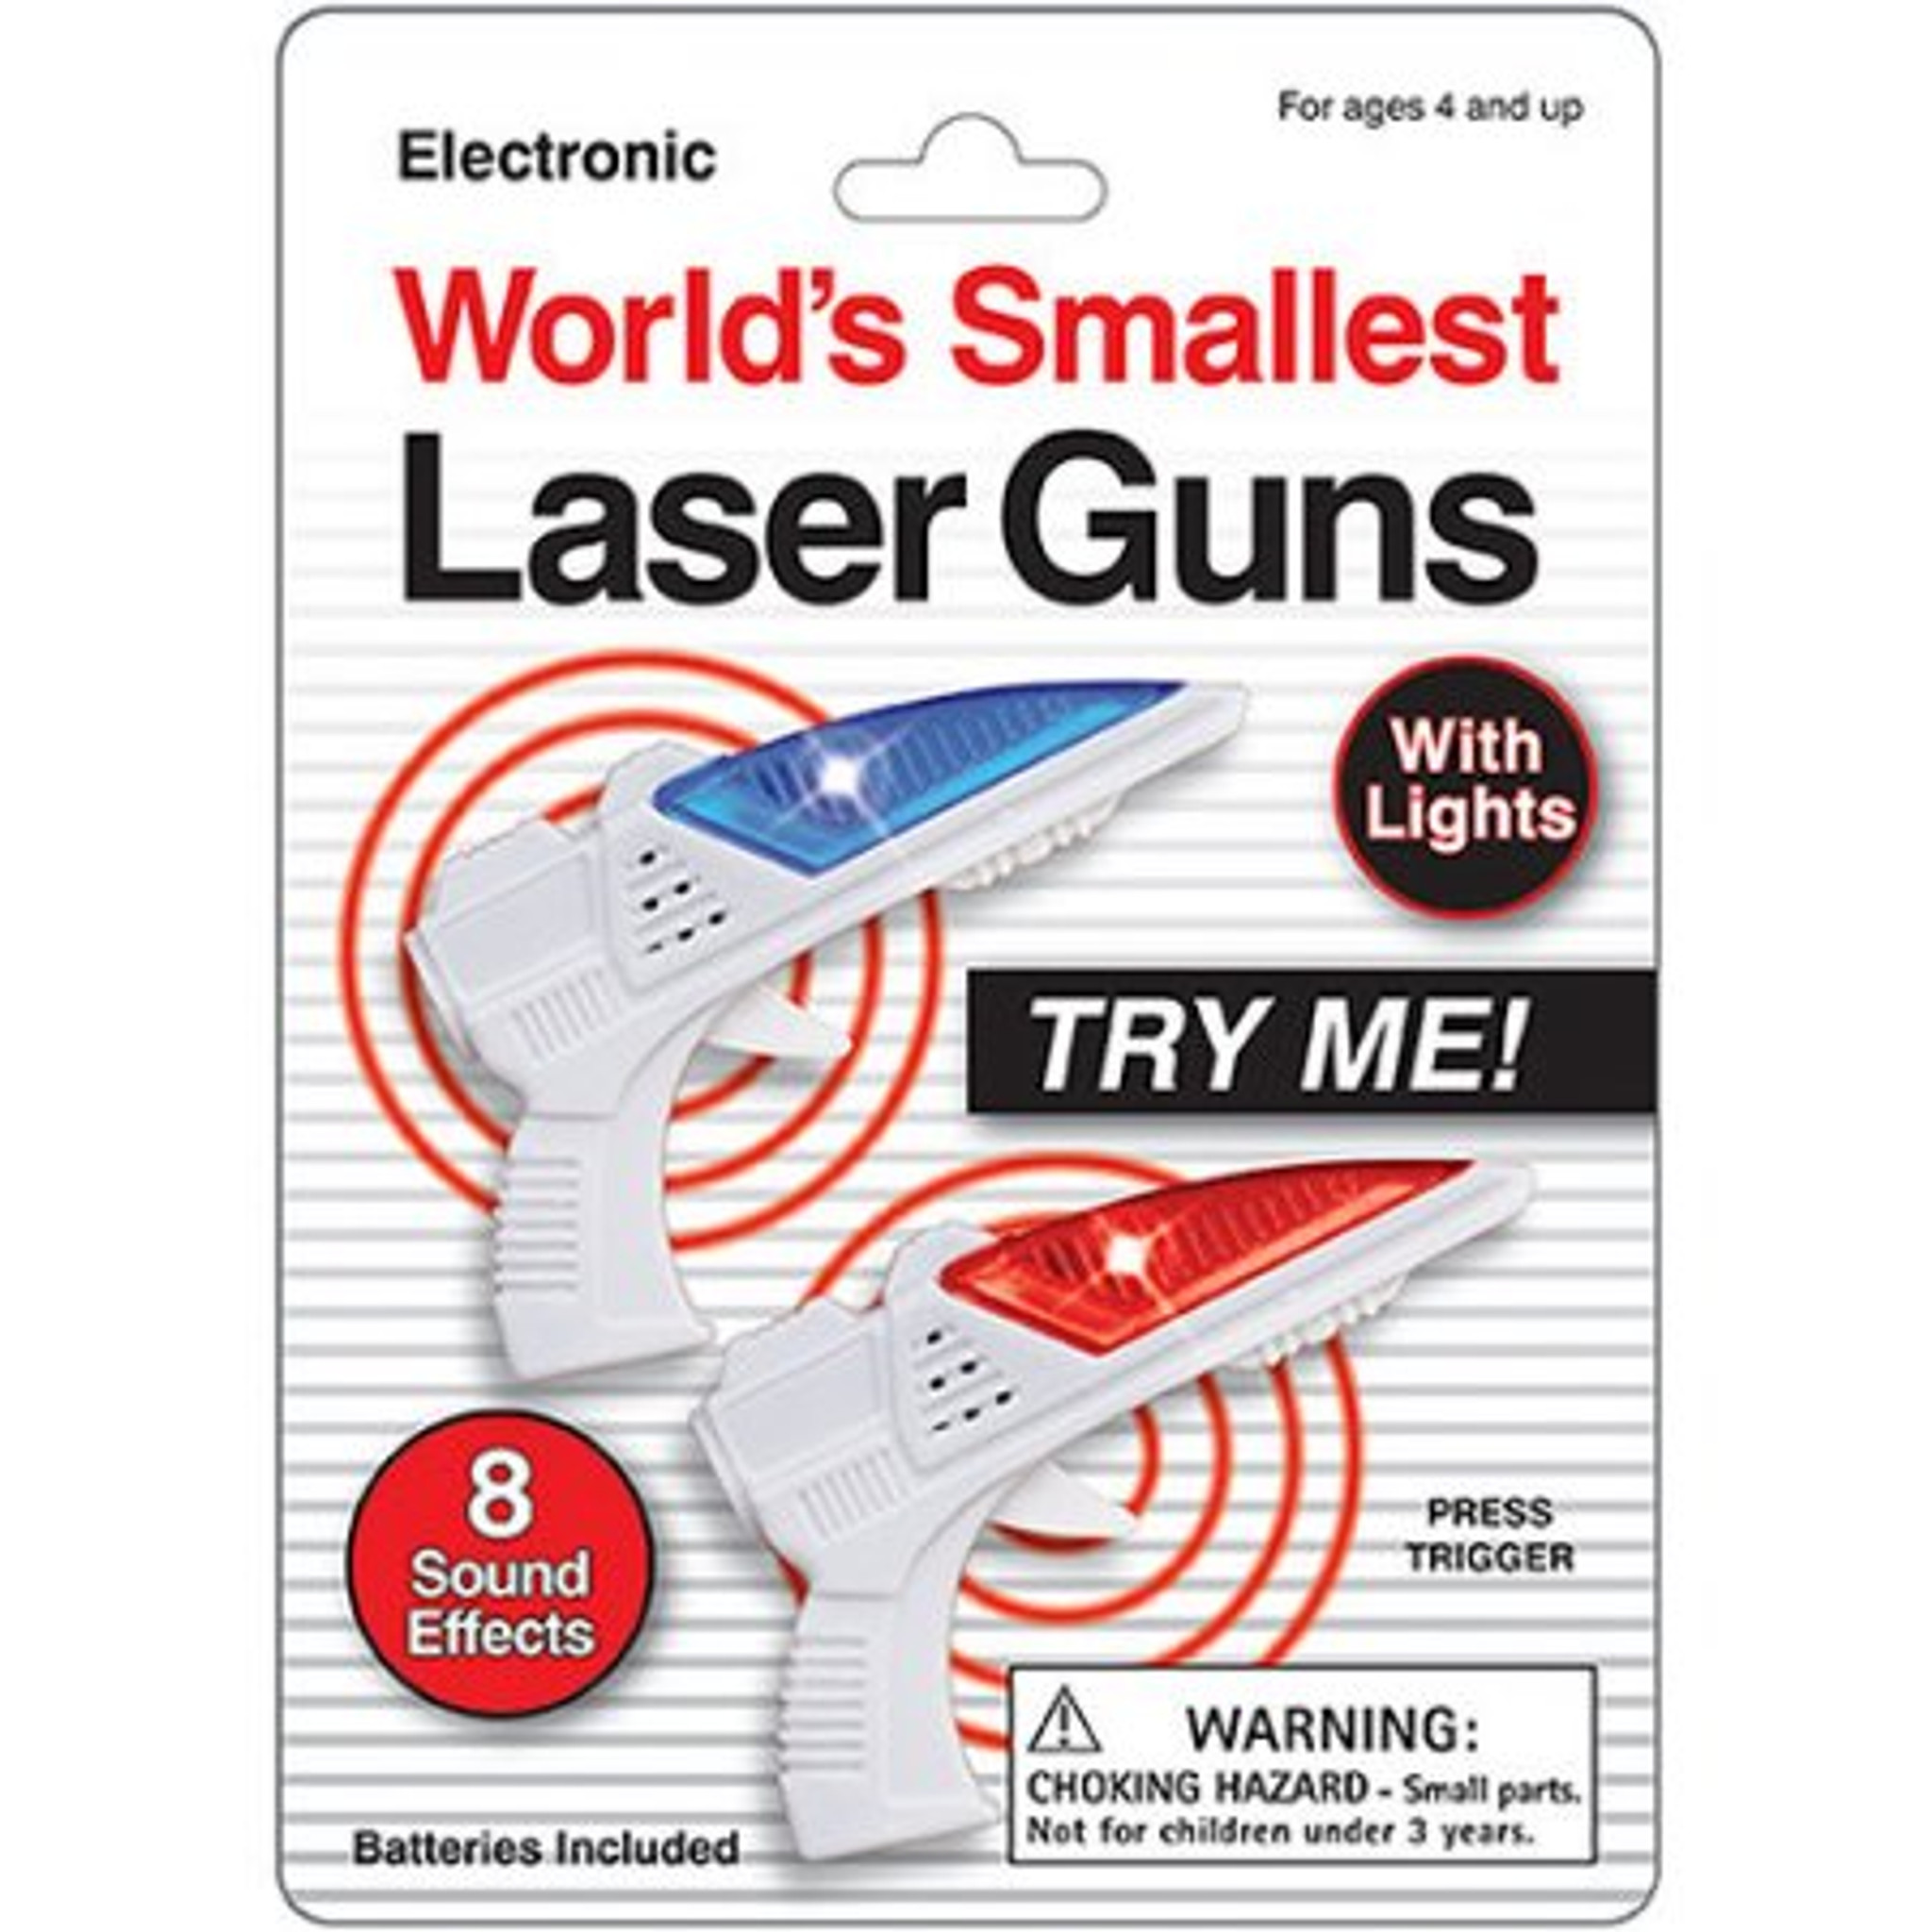 Who has laser and some small adds?